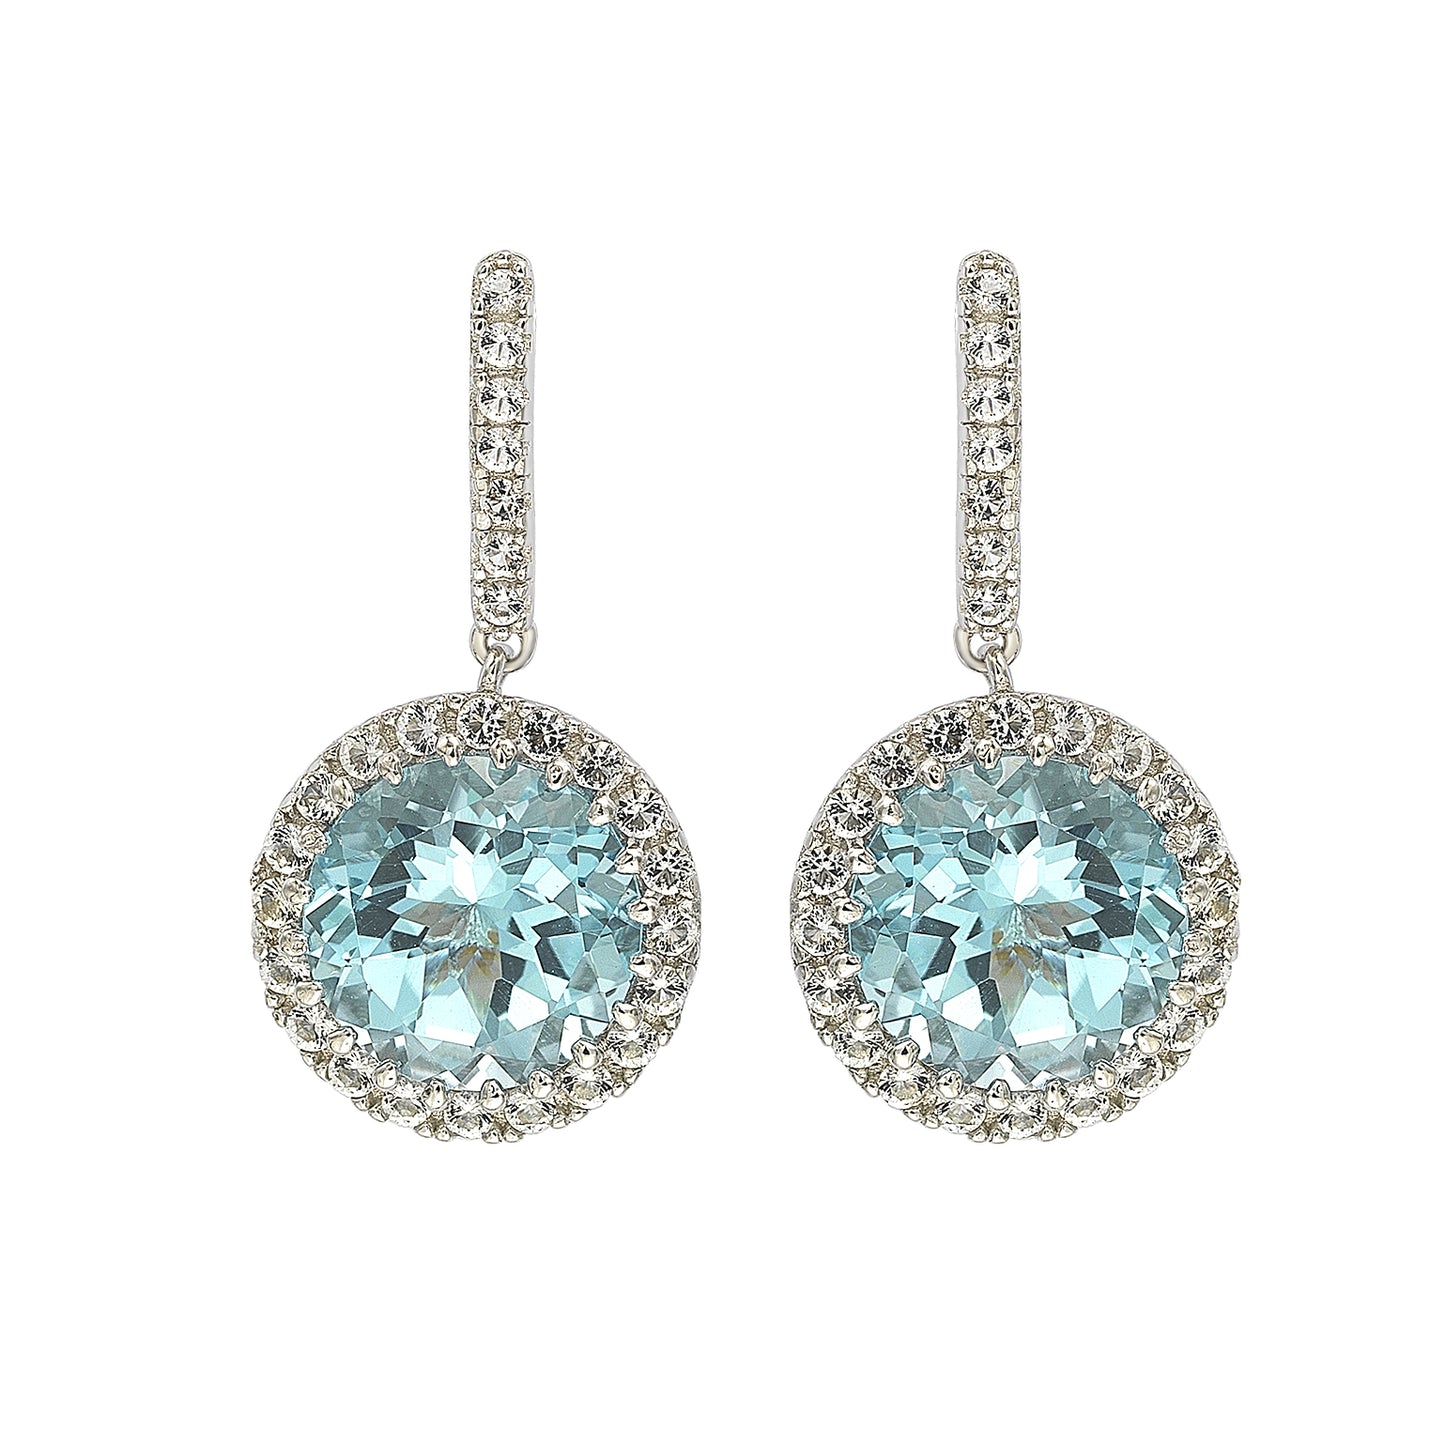 Suzy Levian Sterling Silver Round Cut Blue Topaz And White Topaz Drop Earrings